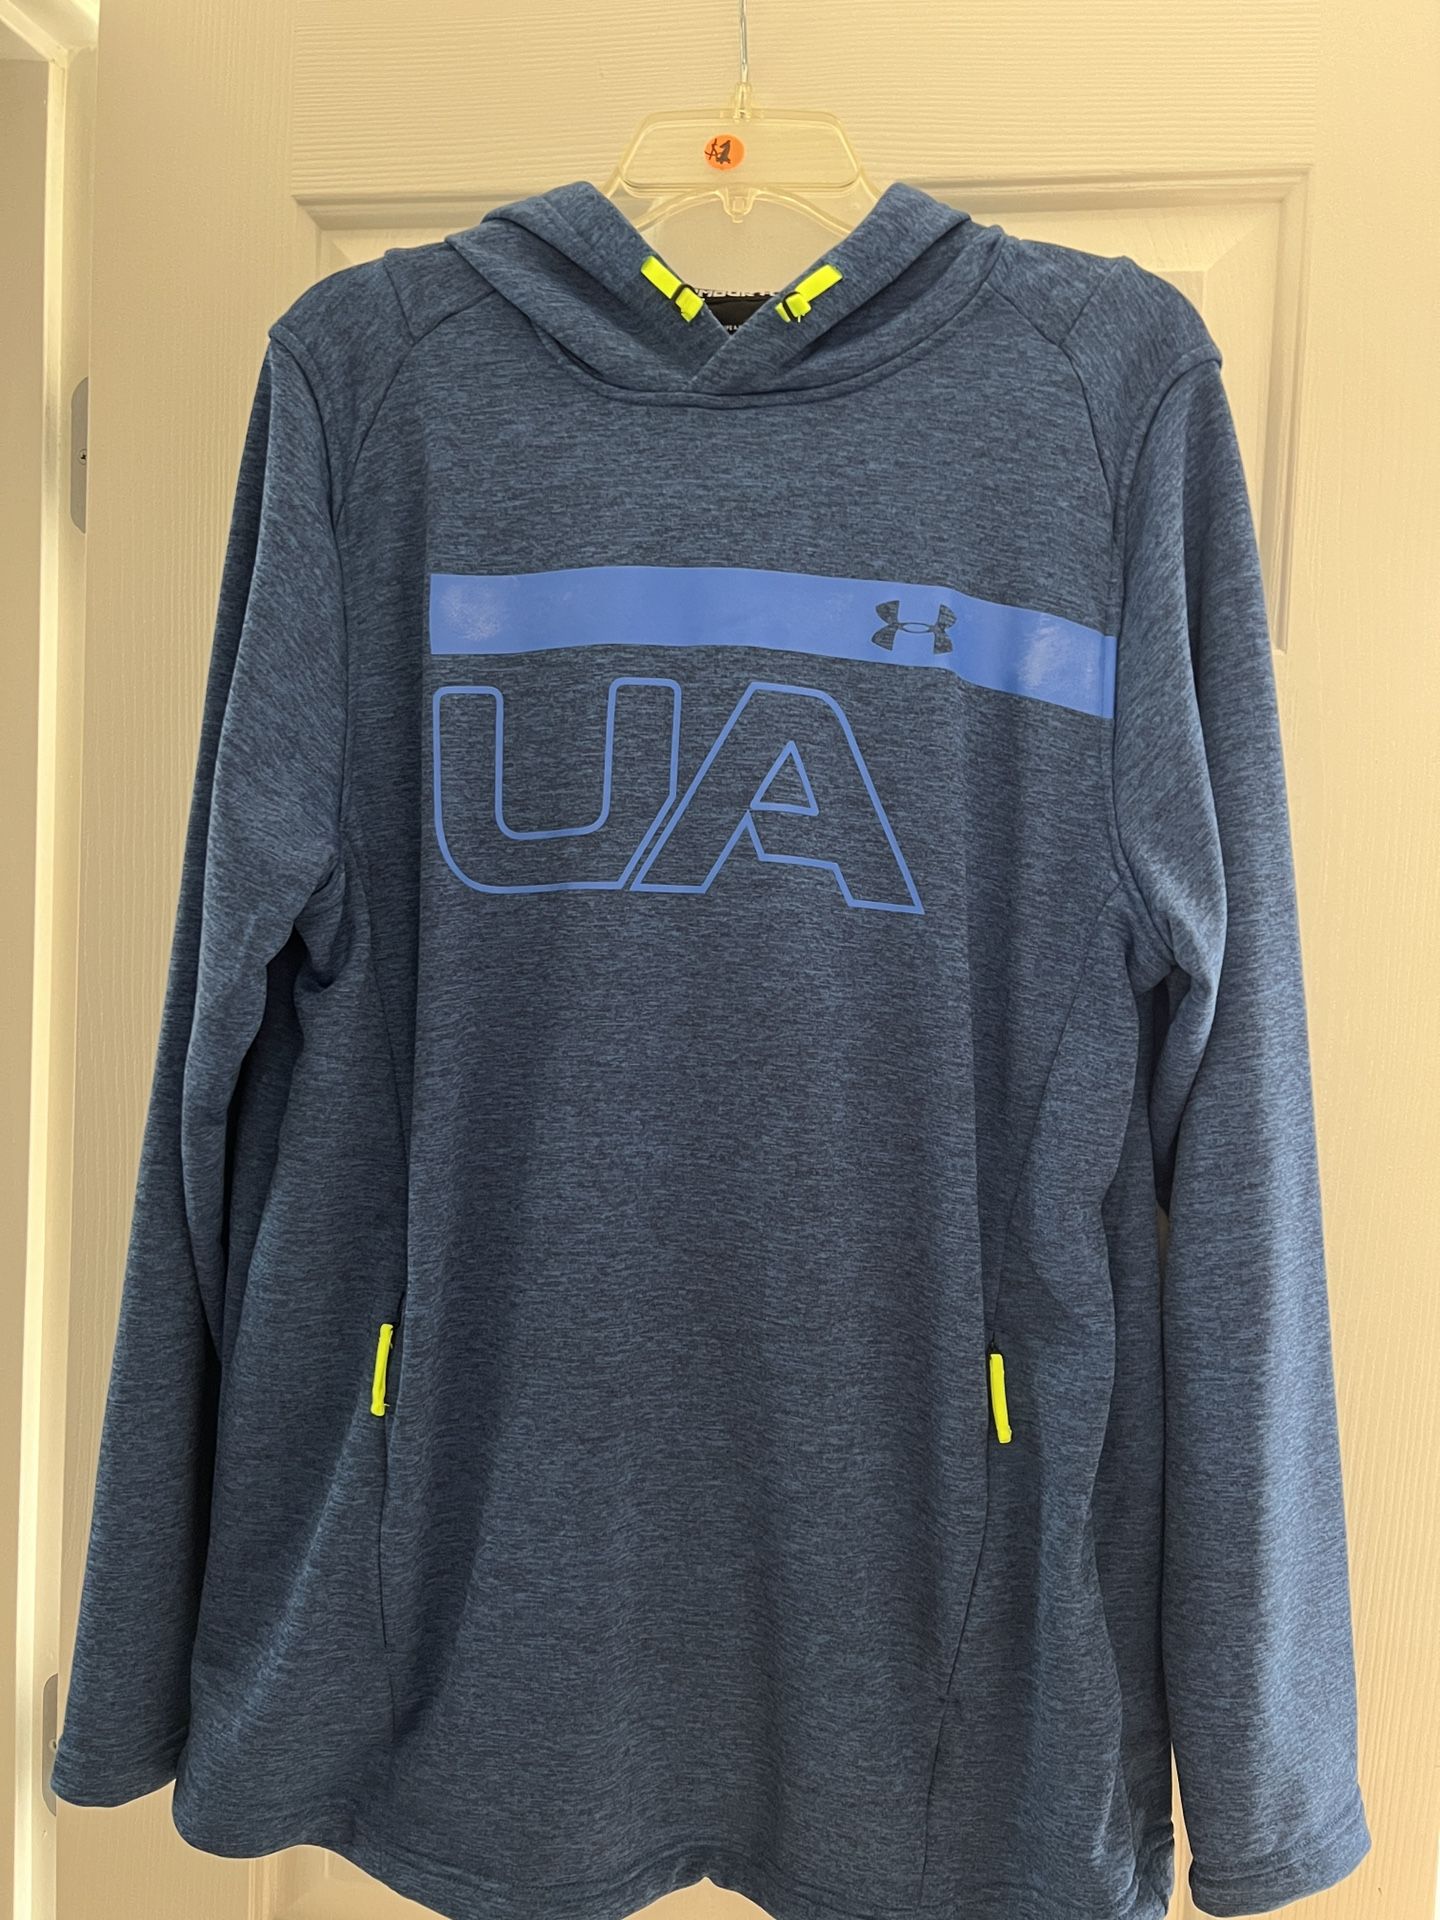 Under Armour  Hoodie  Men’s .Size Large 